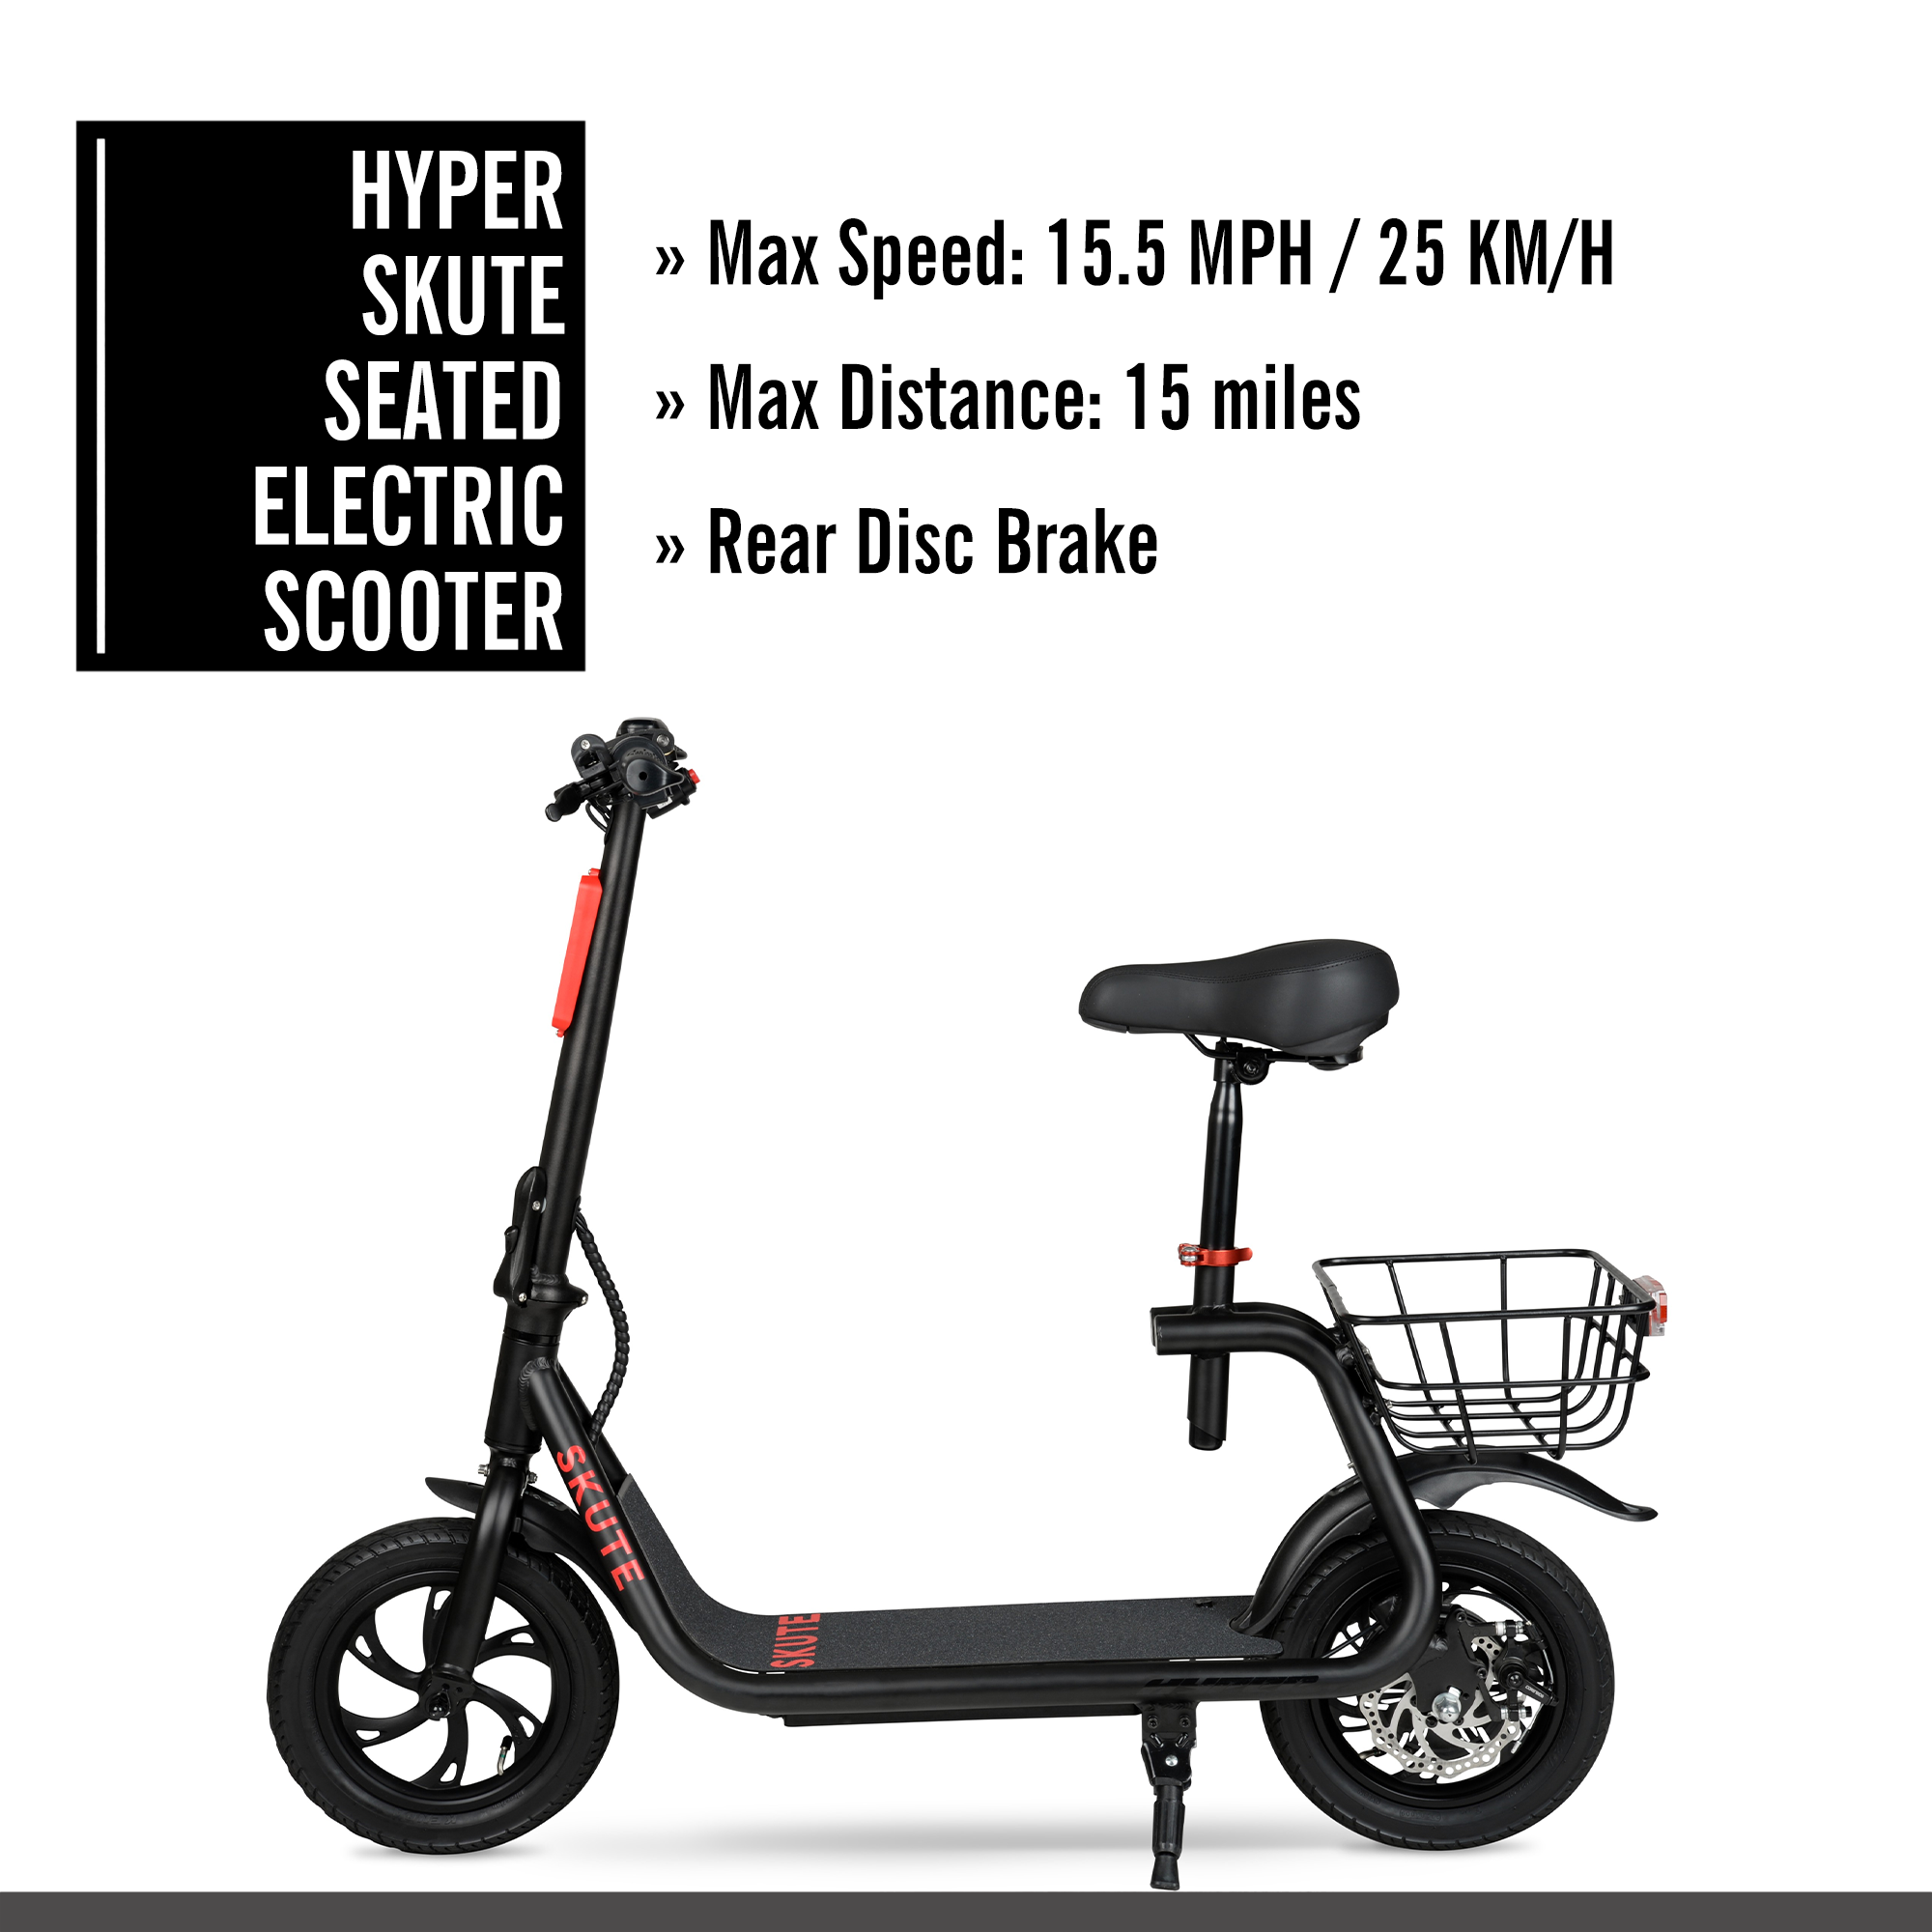 Hyper 36V Skute Commute 12" Seated Electric Scooter with Basket, 250W Motor, 13 Years+, Max Speed 15mph - image 5 of 15